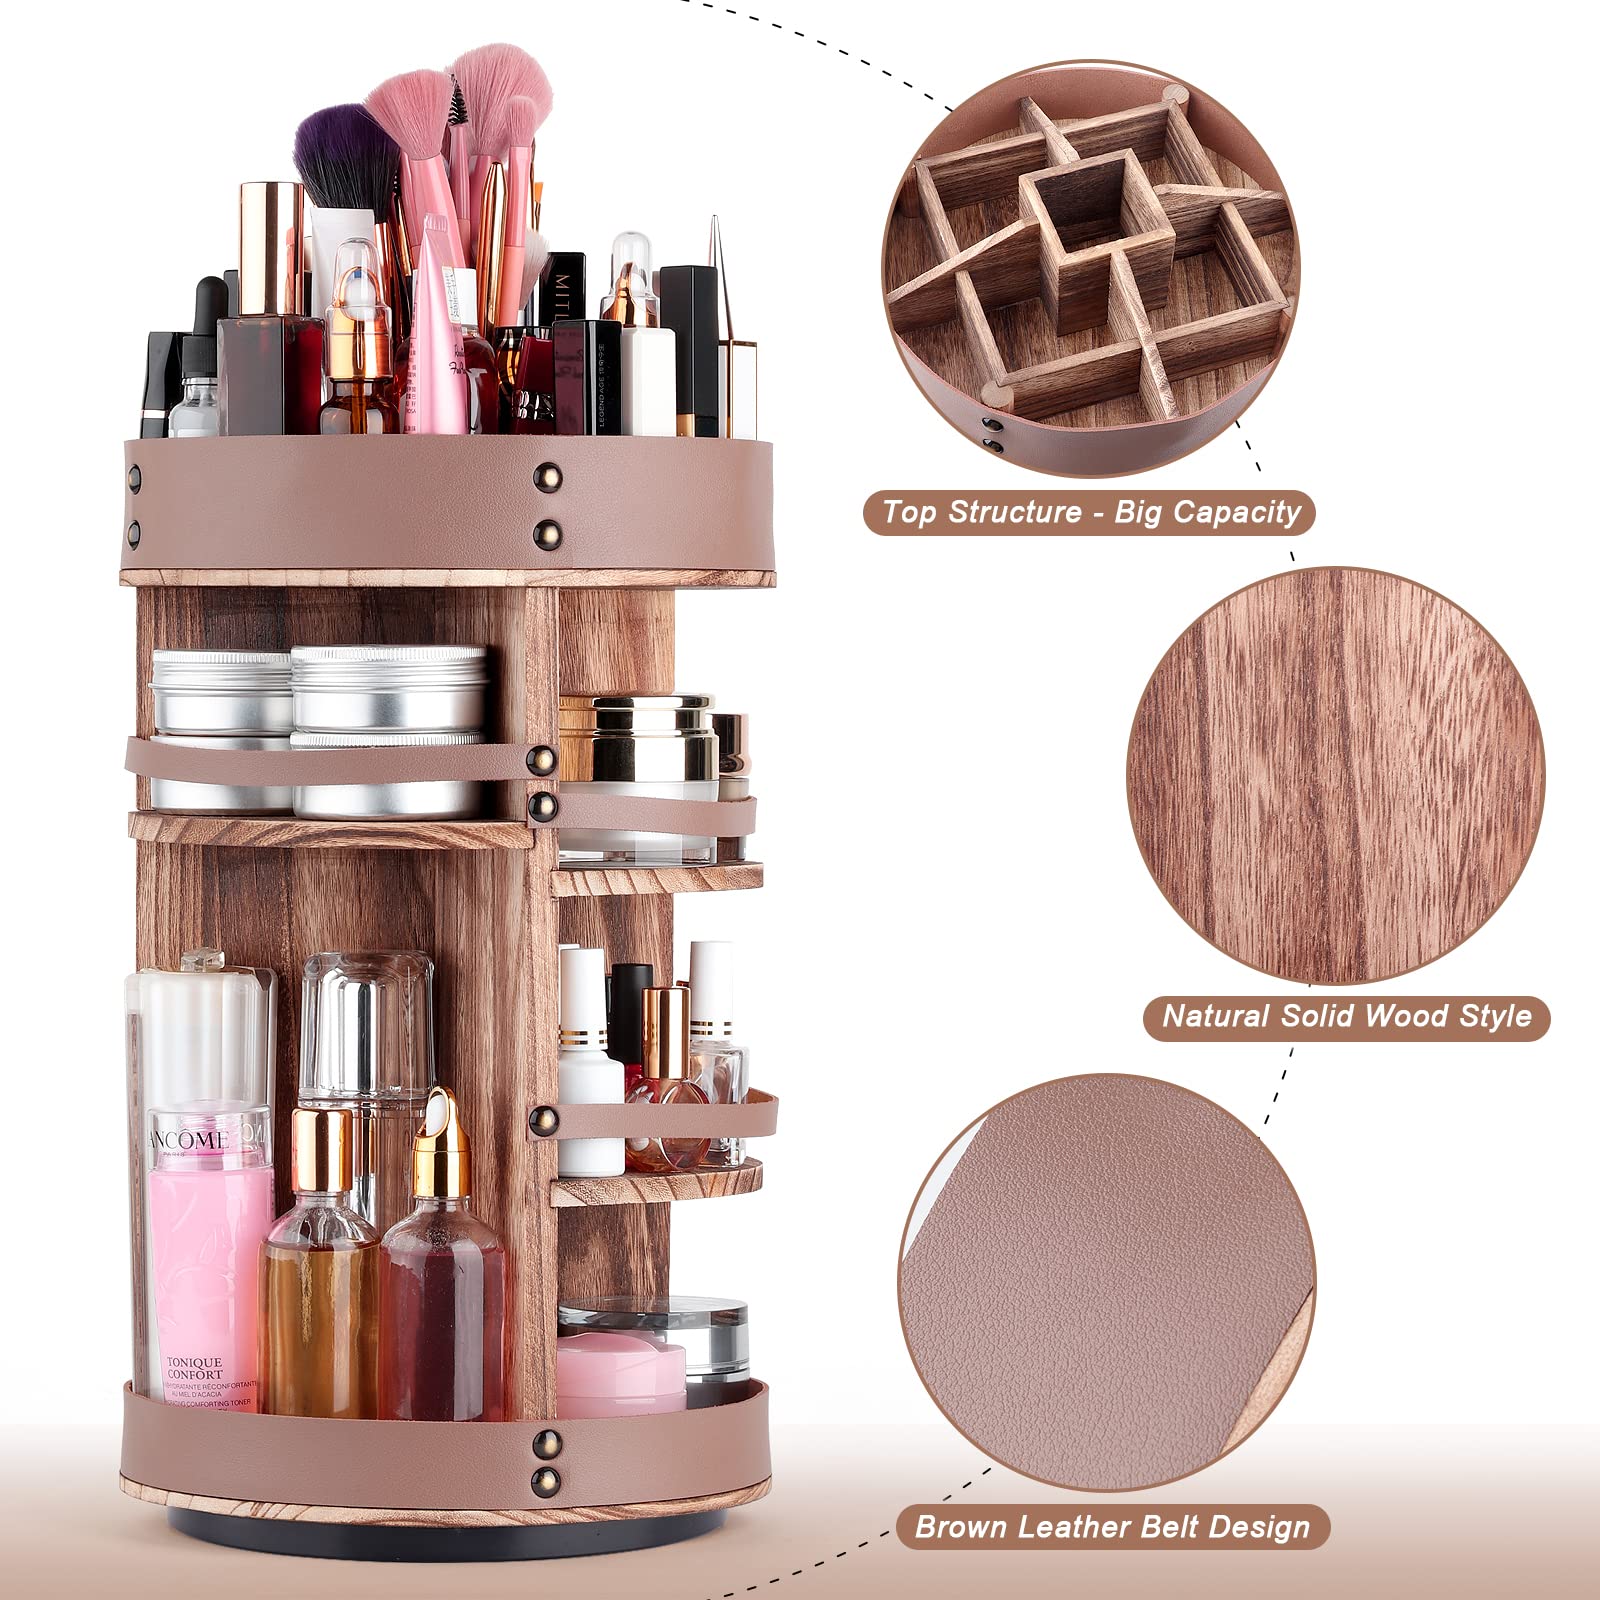 Meangood 360 Rotating Makeup Organizer, DIY Vintage Style Cosmetic Storage Display Box with 5 Height for High/Low Bottles Storage, Large Capacity Storage Carousel for Makeup, Toiletries, and More